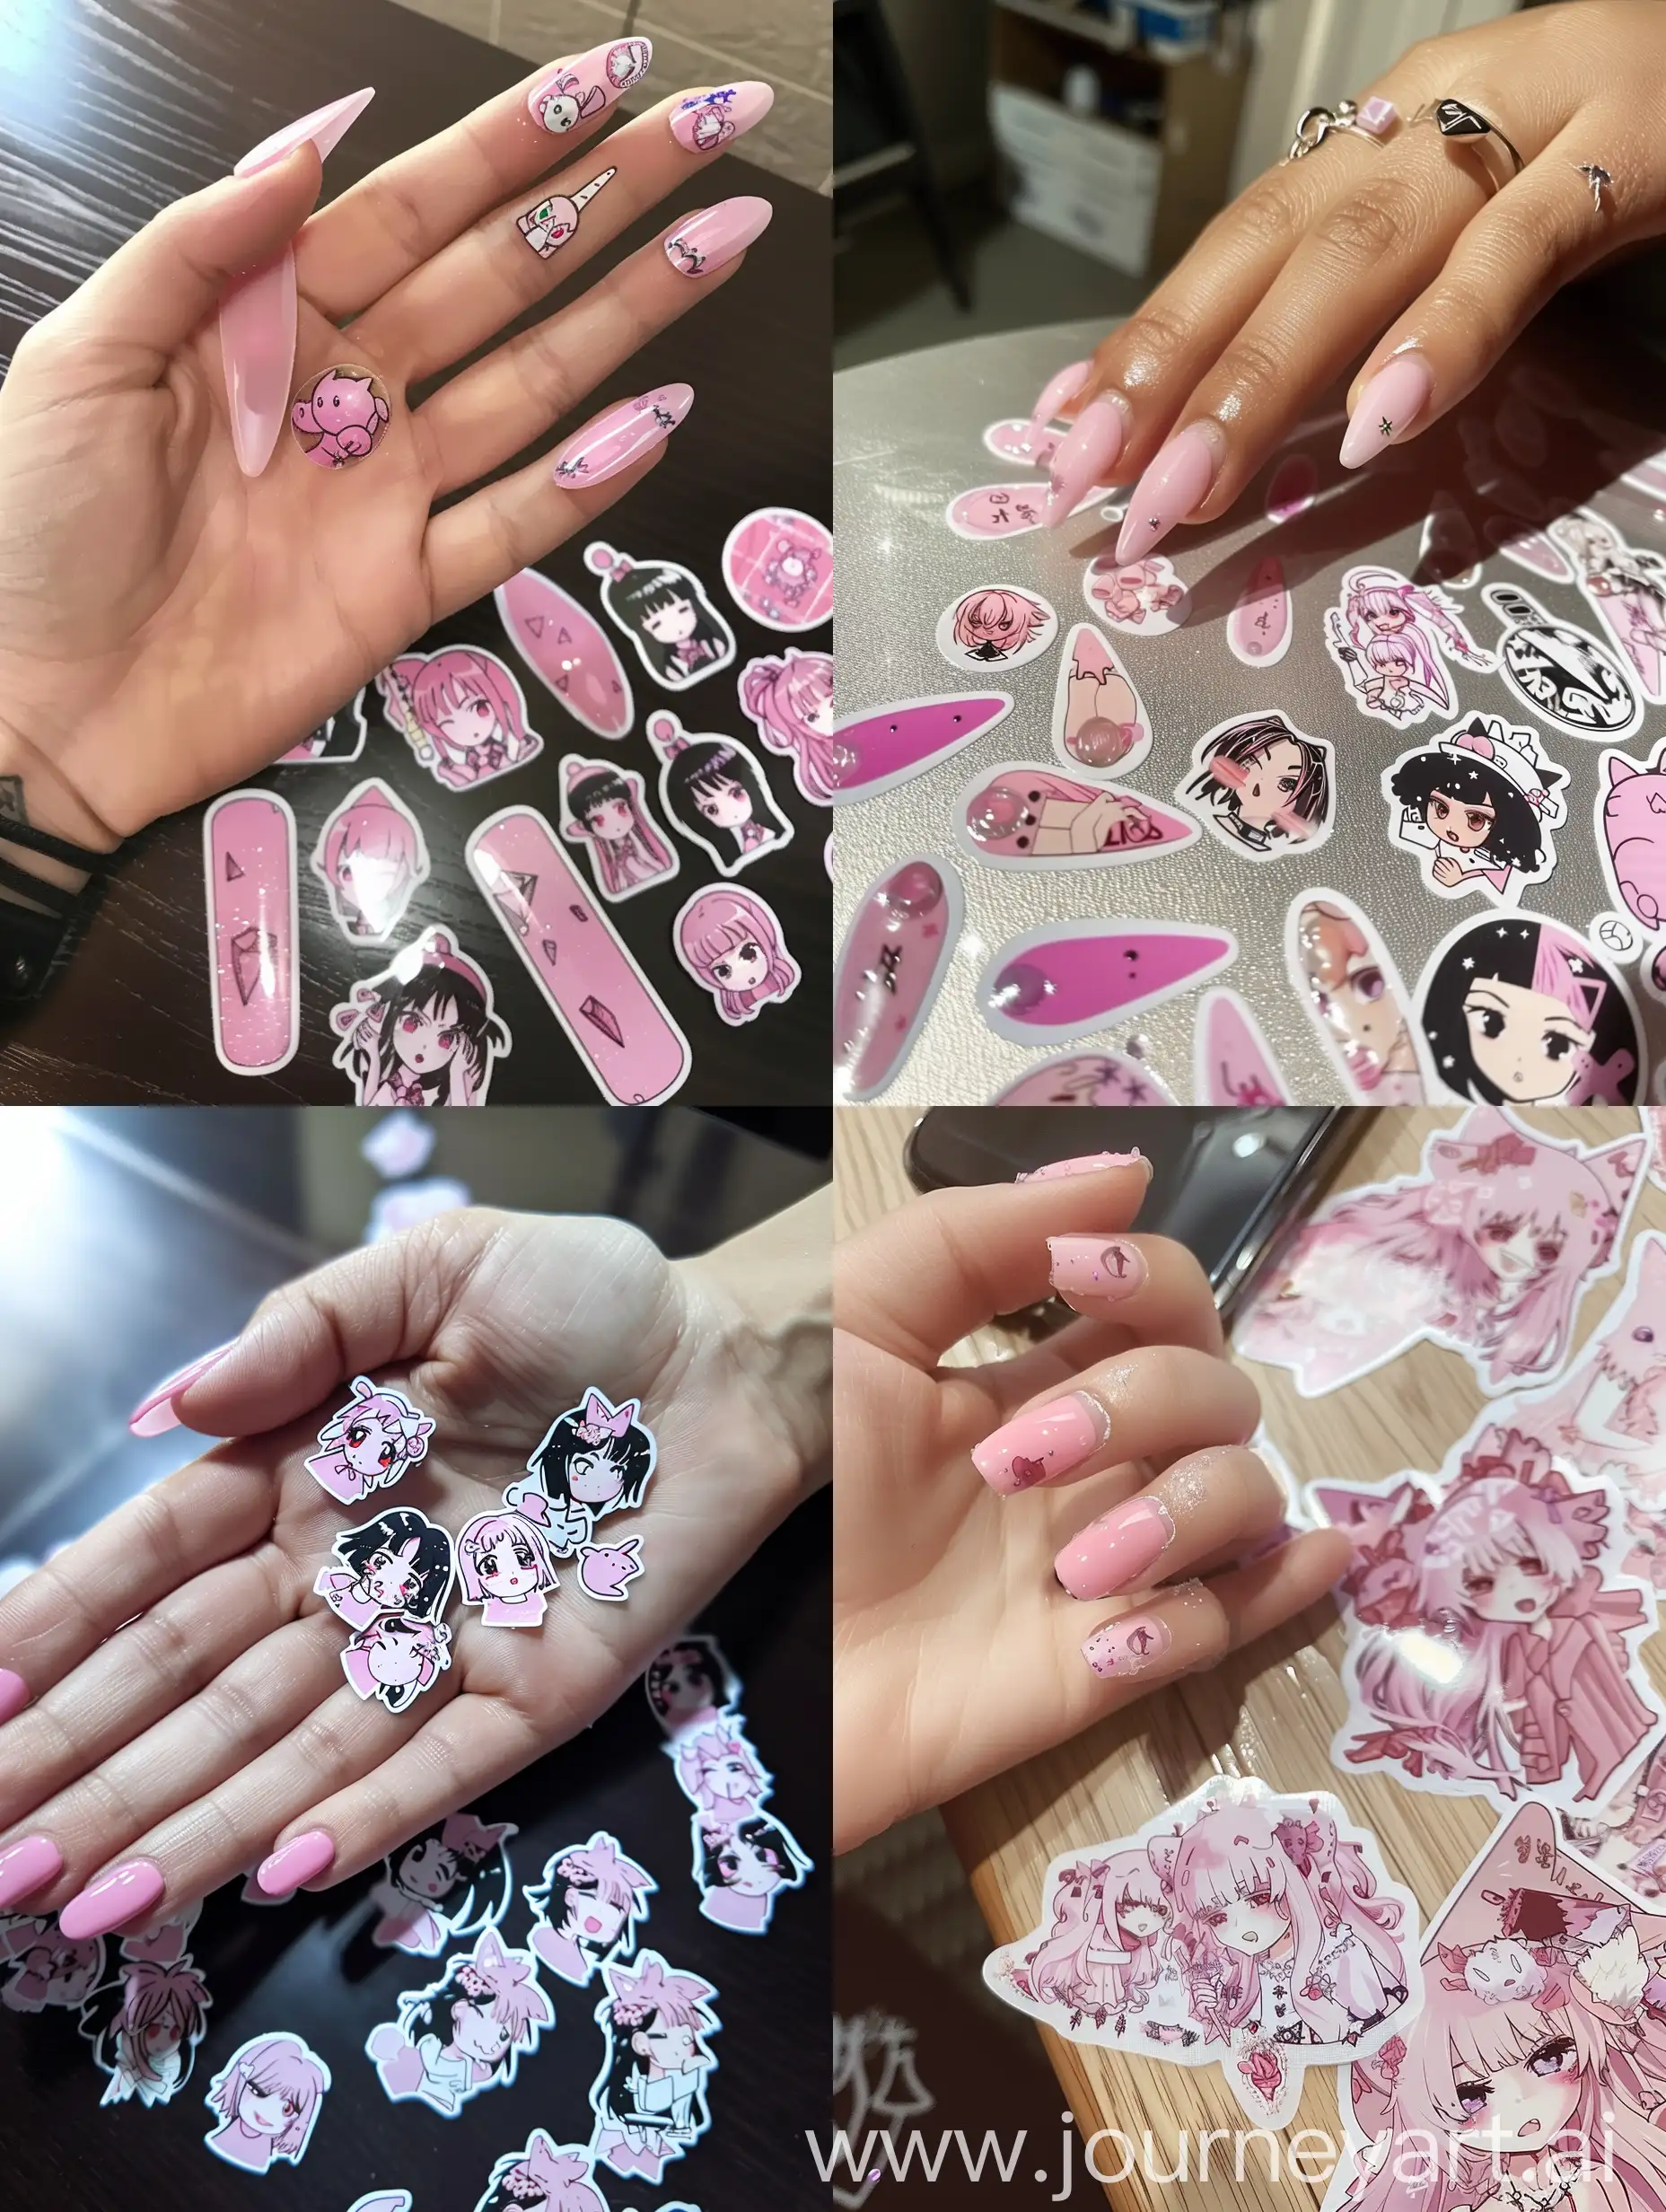 Selfie-Girl-with-Pink-Nail-Art-and-Anime-Stickers